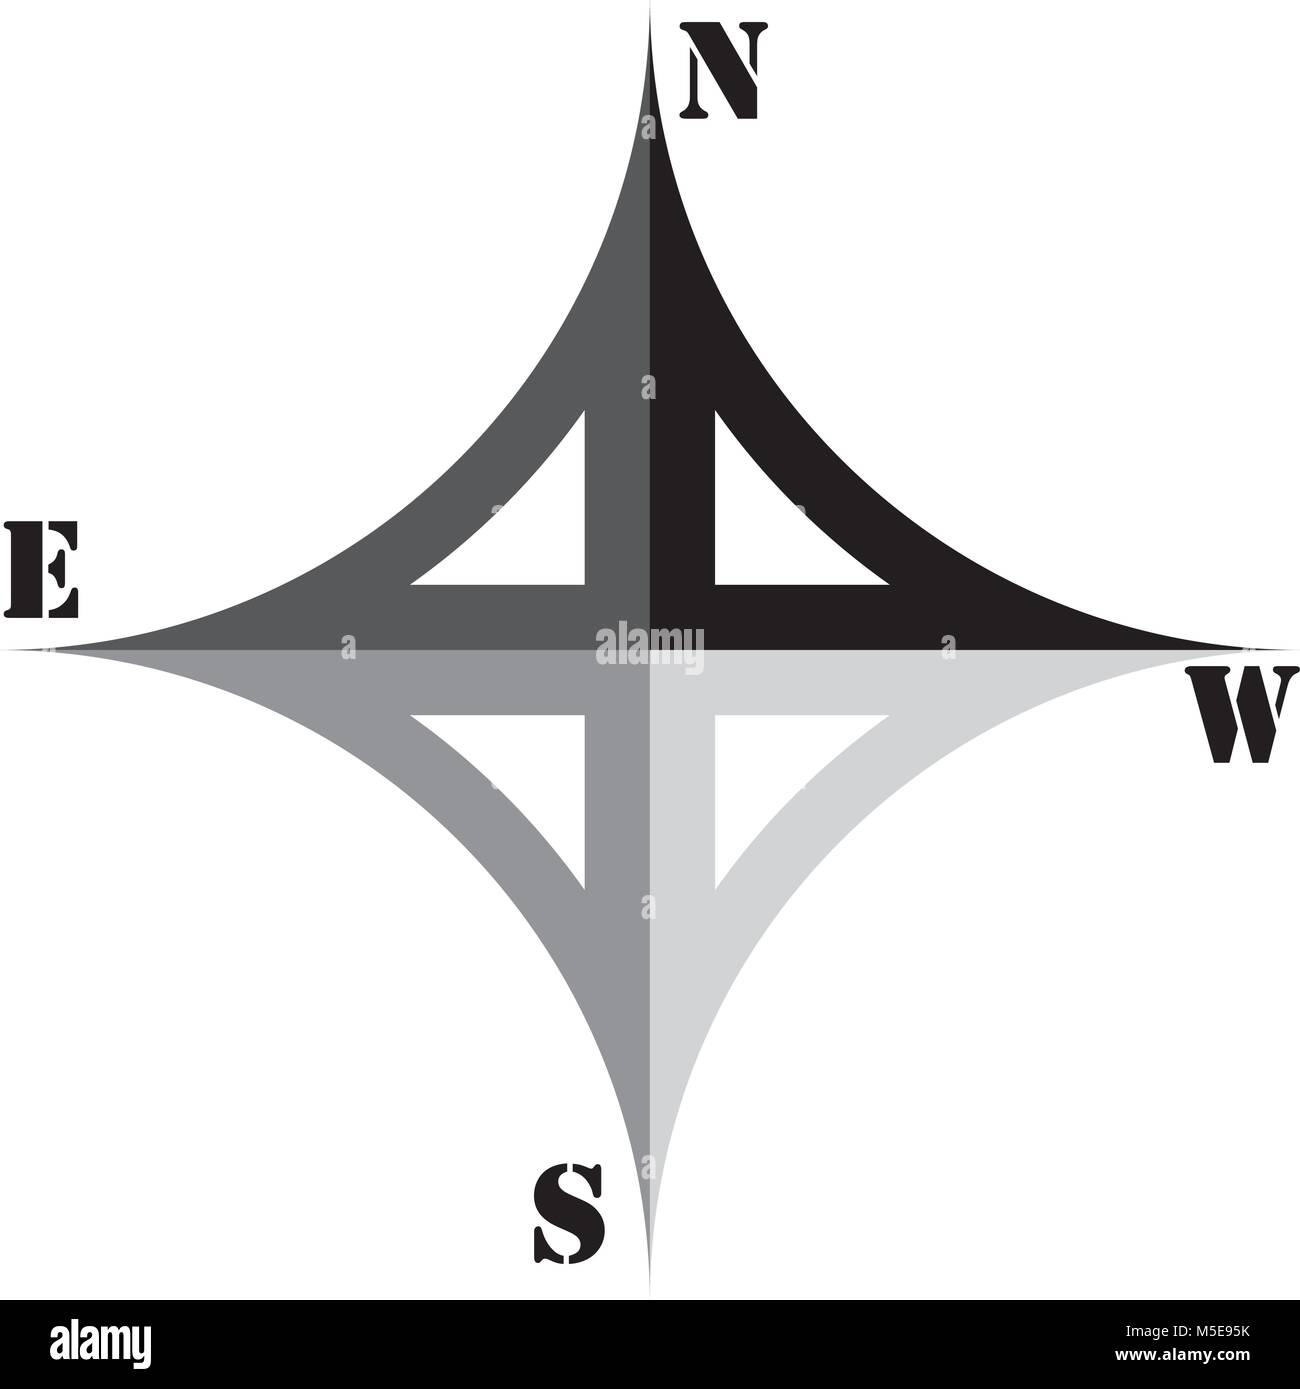 Cardinal Points Indicator black to gray elements Stock Vector